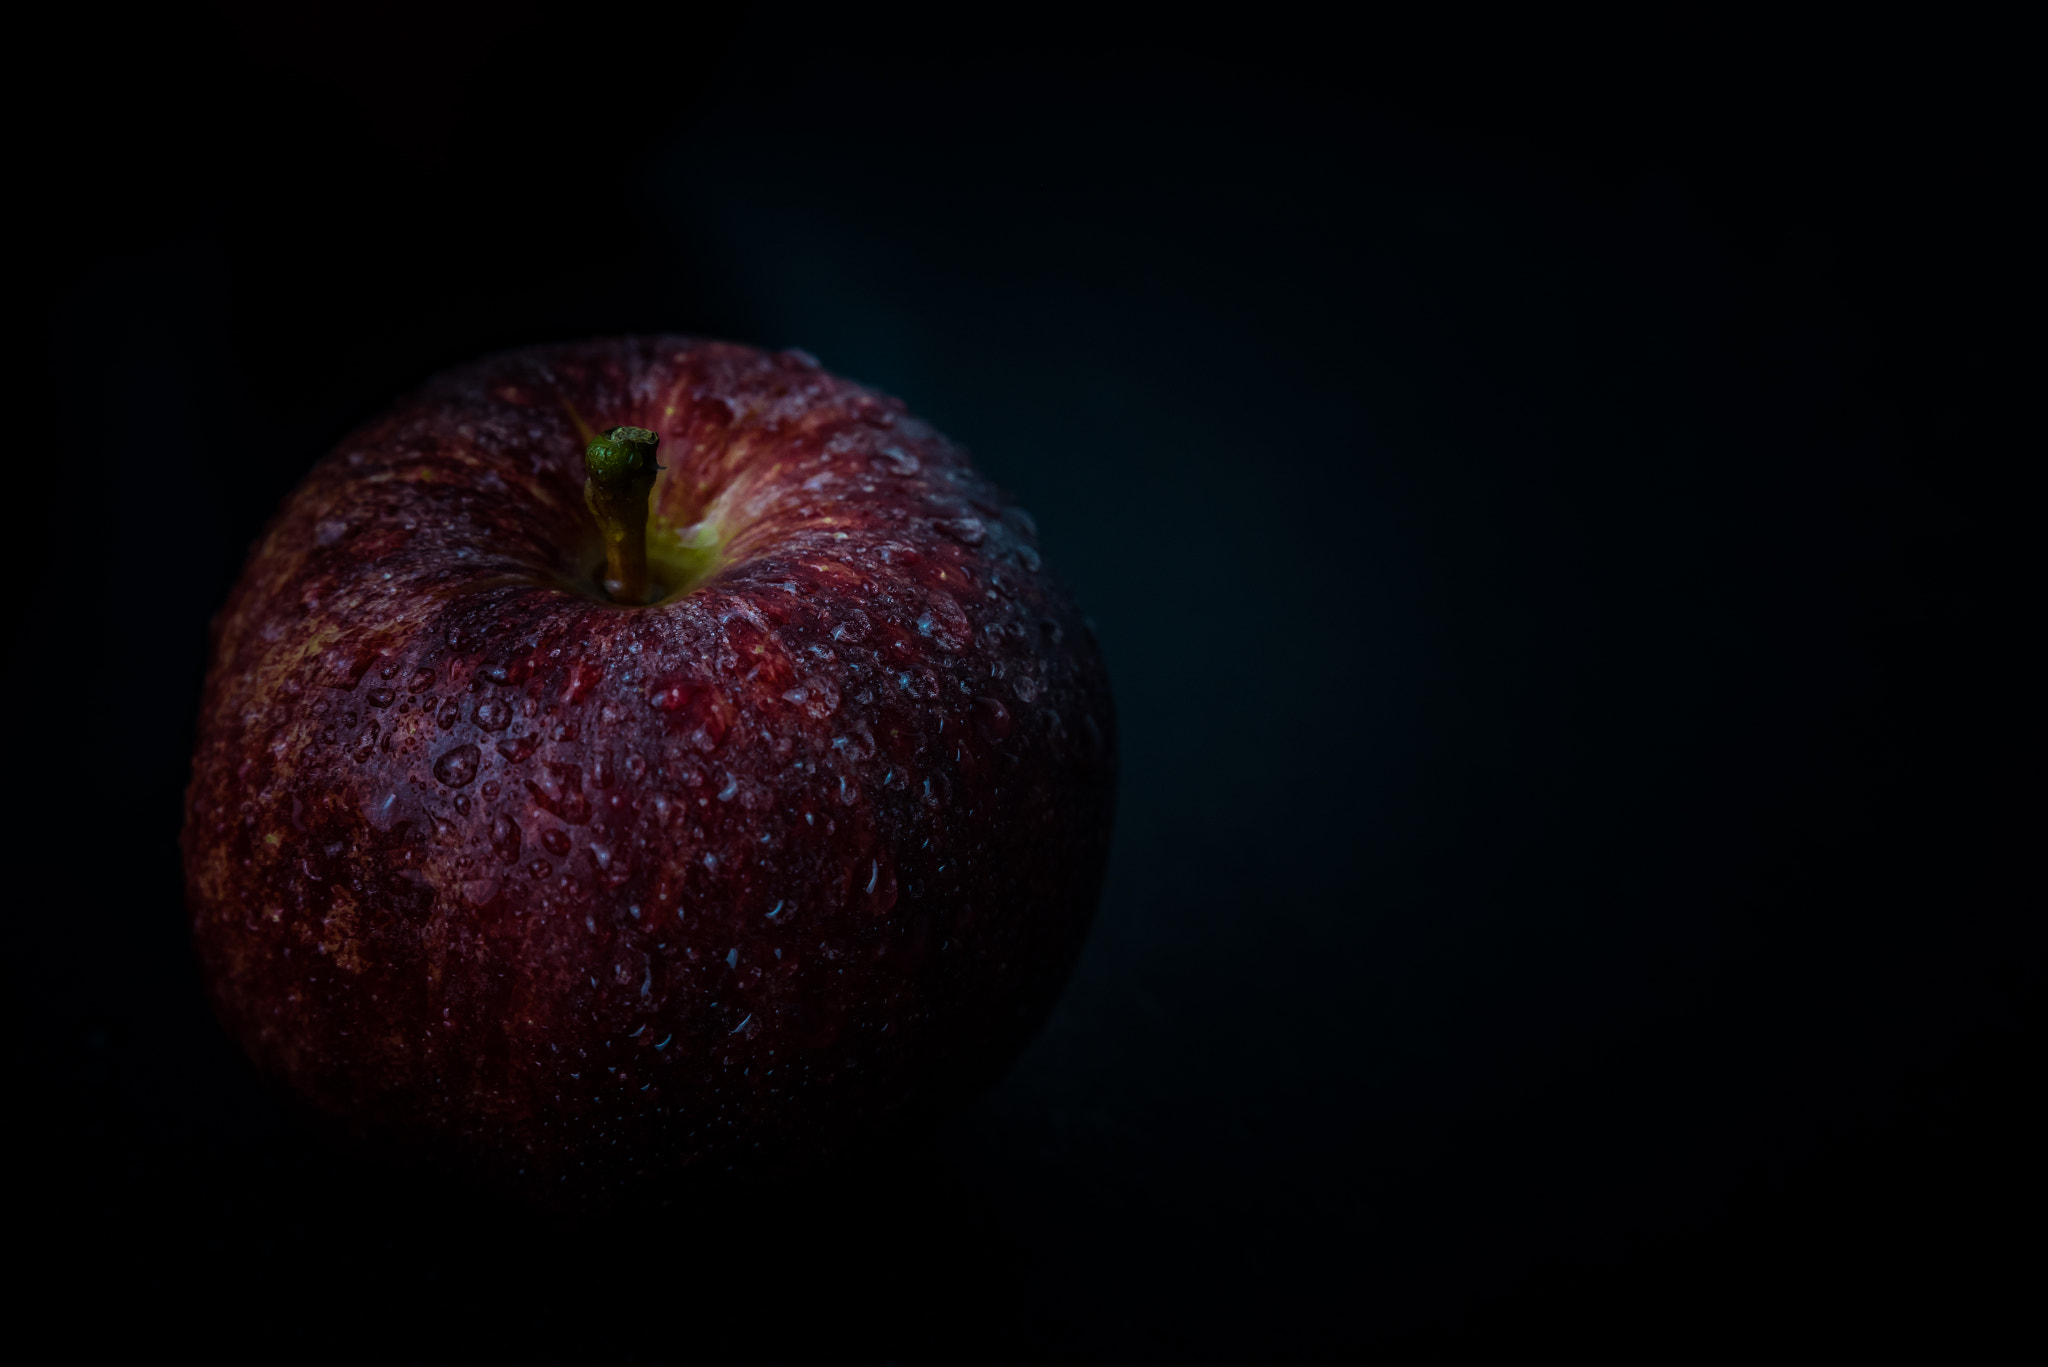 Nikon D750 sample photo. Red apple against black background photography